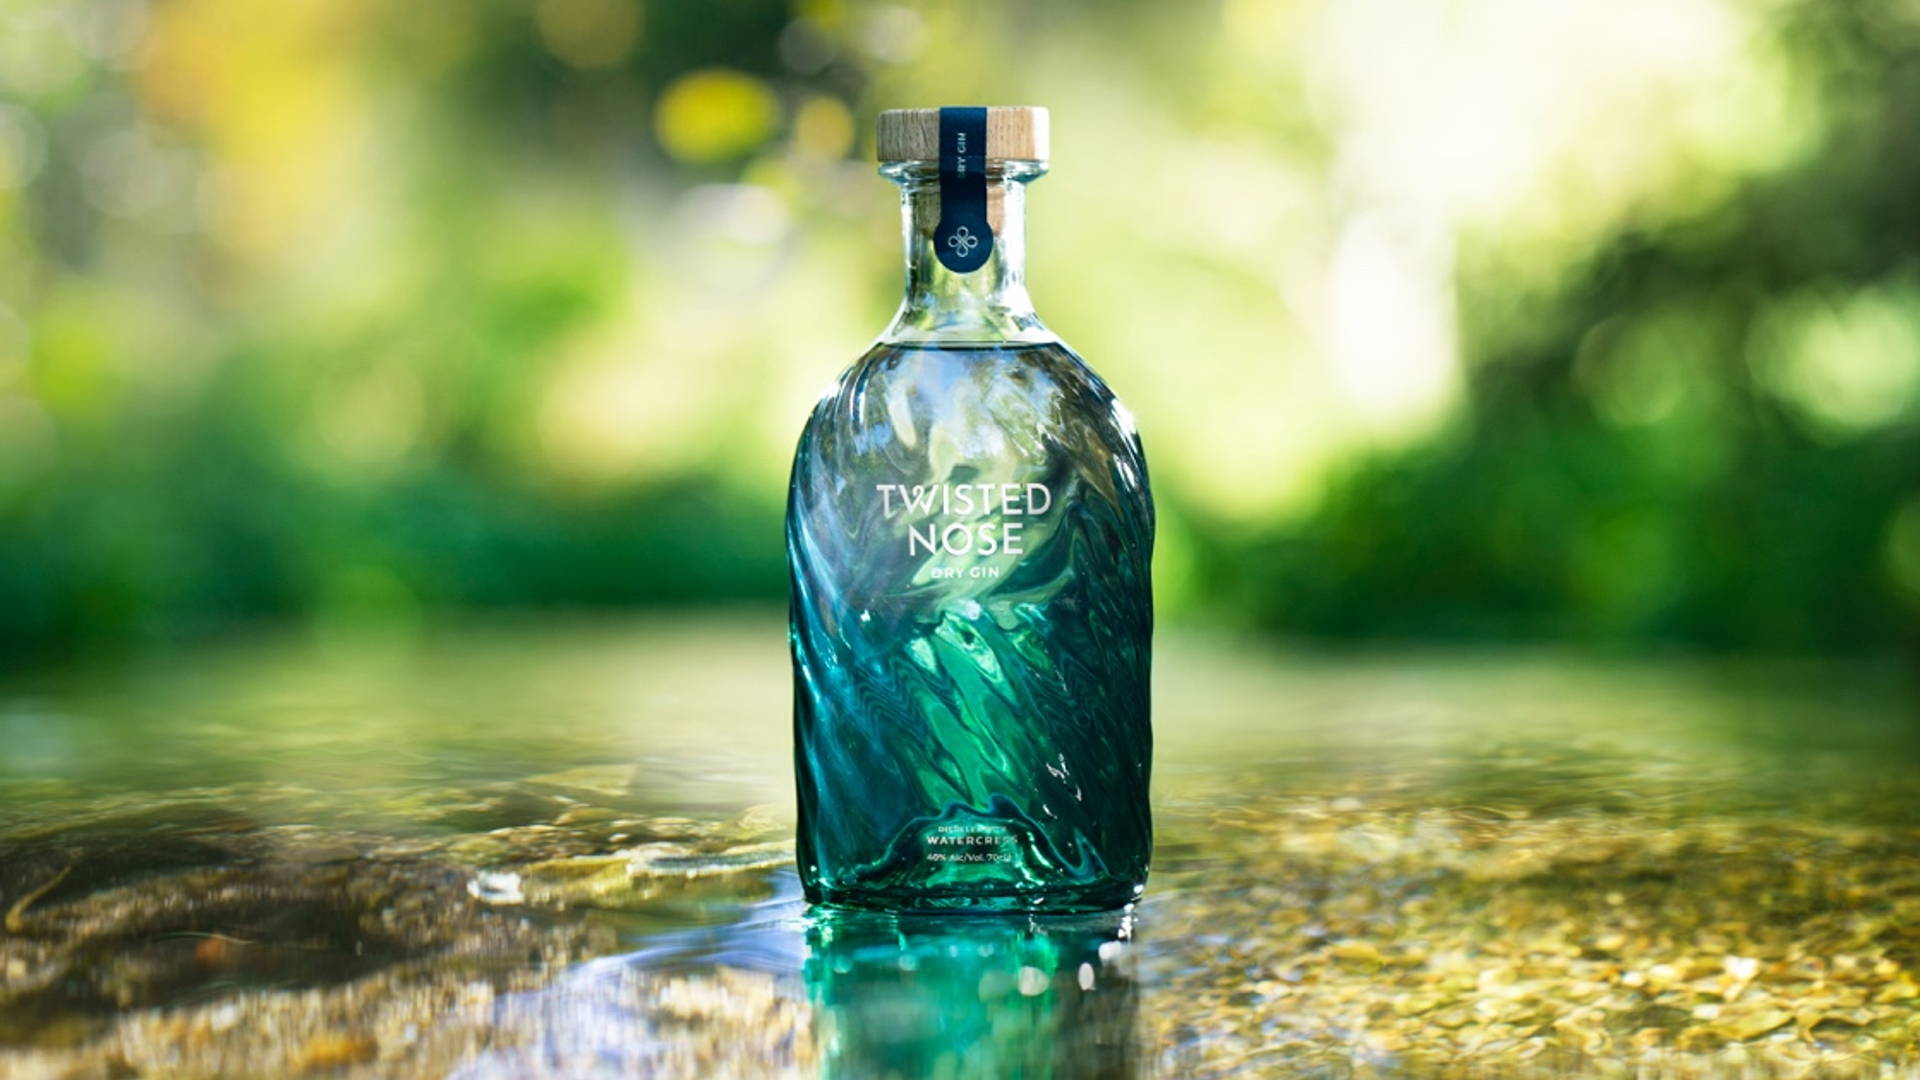 Featured image for Agency Valiant Brings The Essence of Hampshire To Twisted Nose Gin’s New Bottle